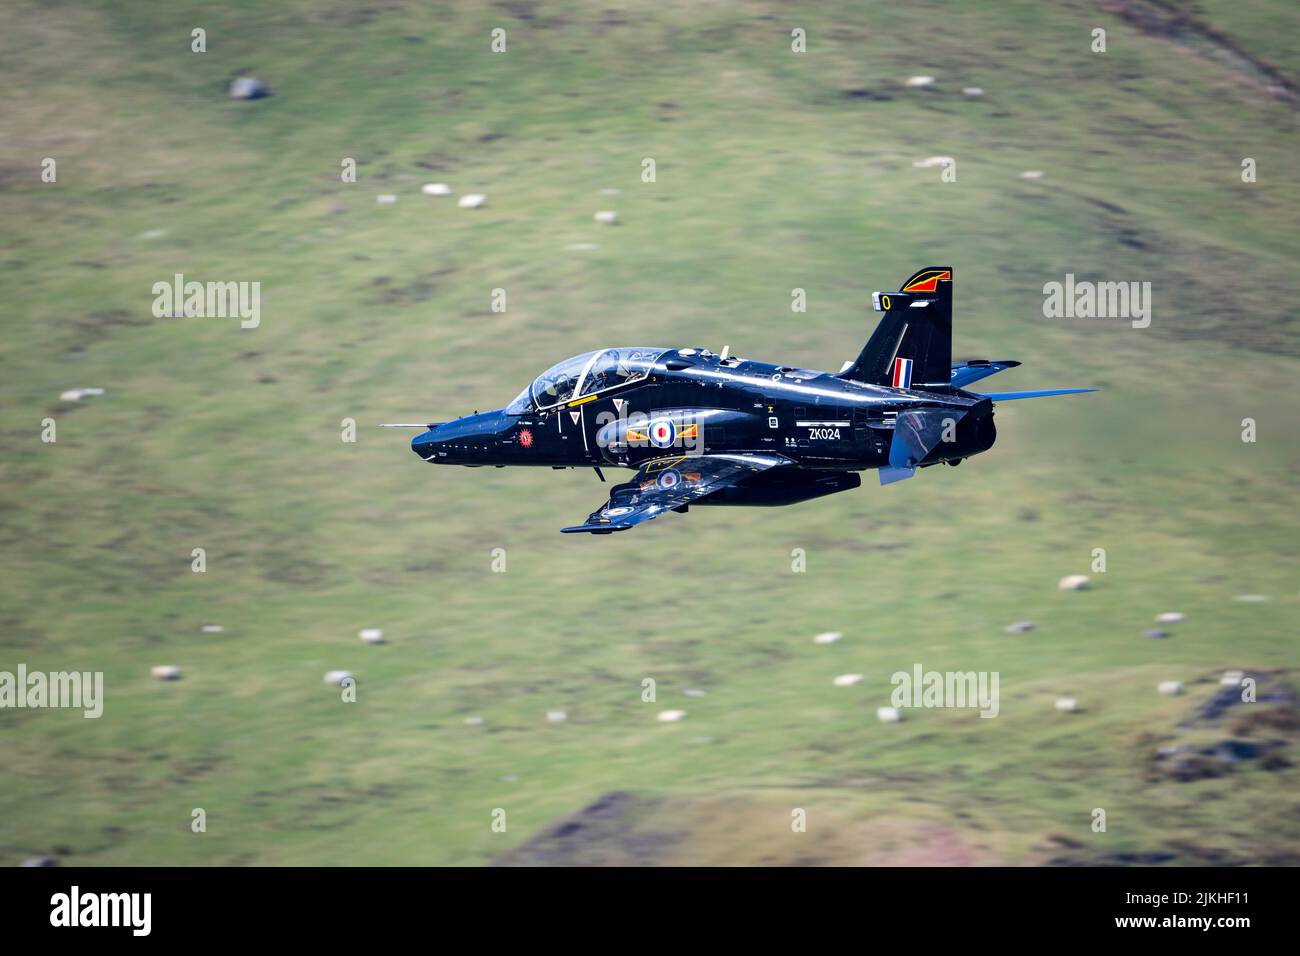 A low flying jet in the Mach Loop, Wales, United Kingdom Stock Photo